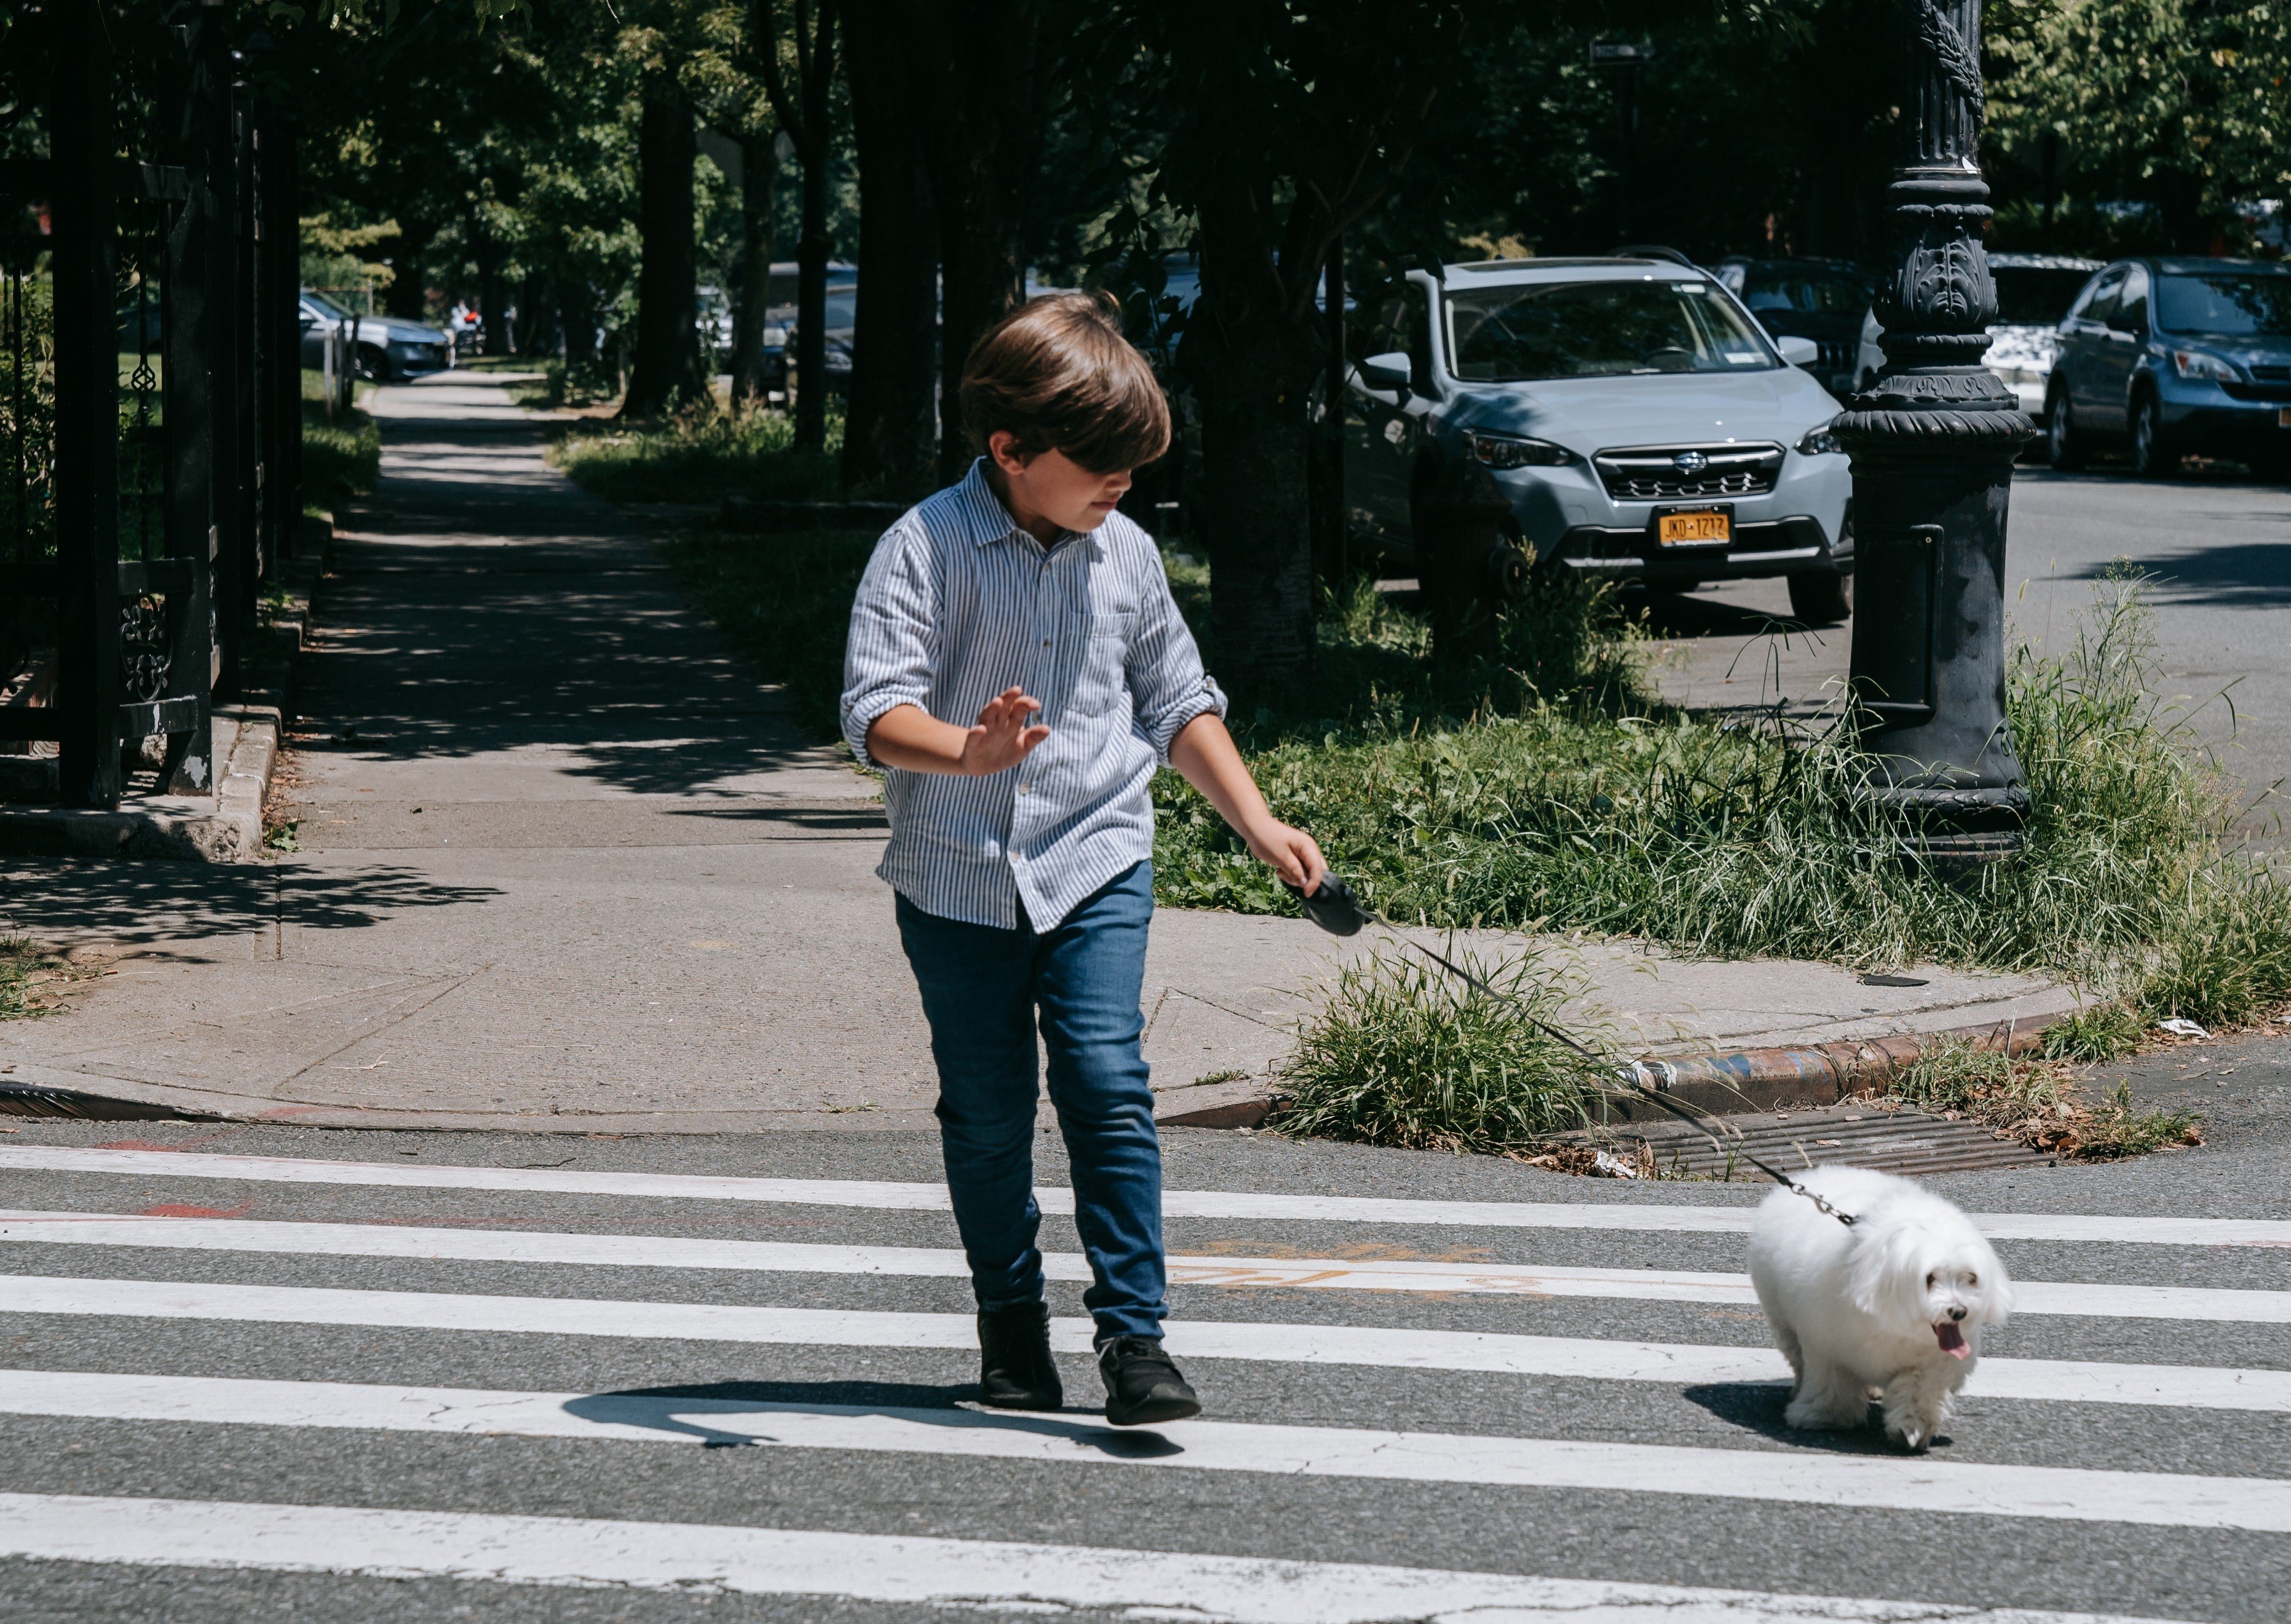 The boy walked dogs, mowed lawns, and did other petty gigs to save the money he needed to buy the toys. | Source: Pexels